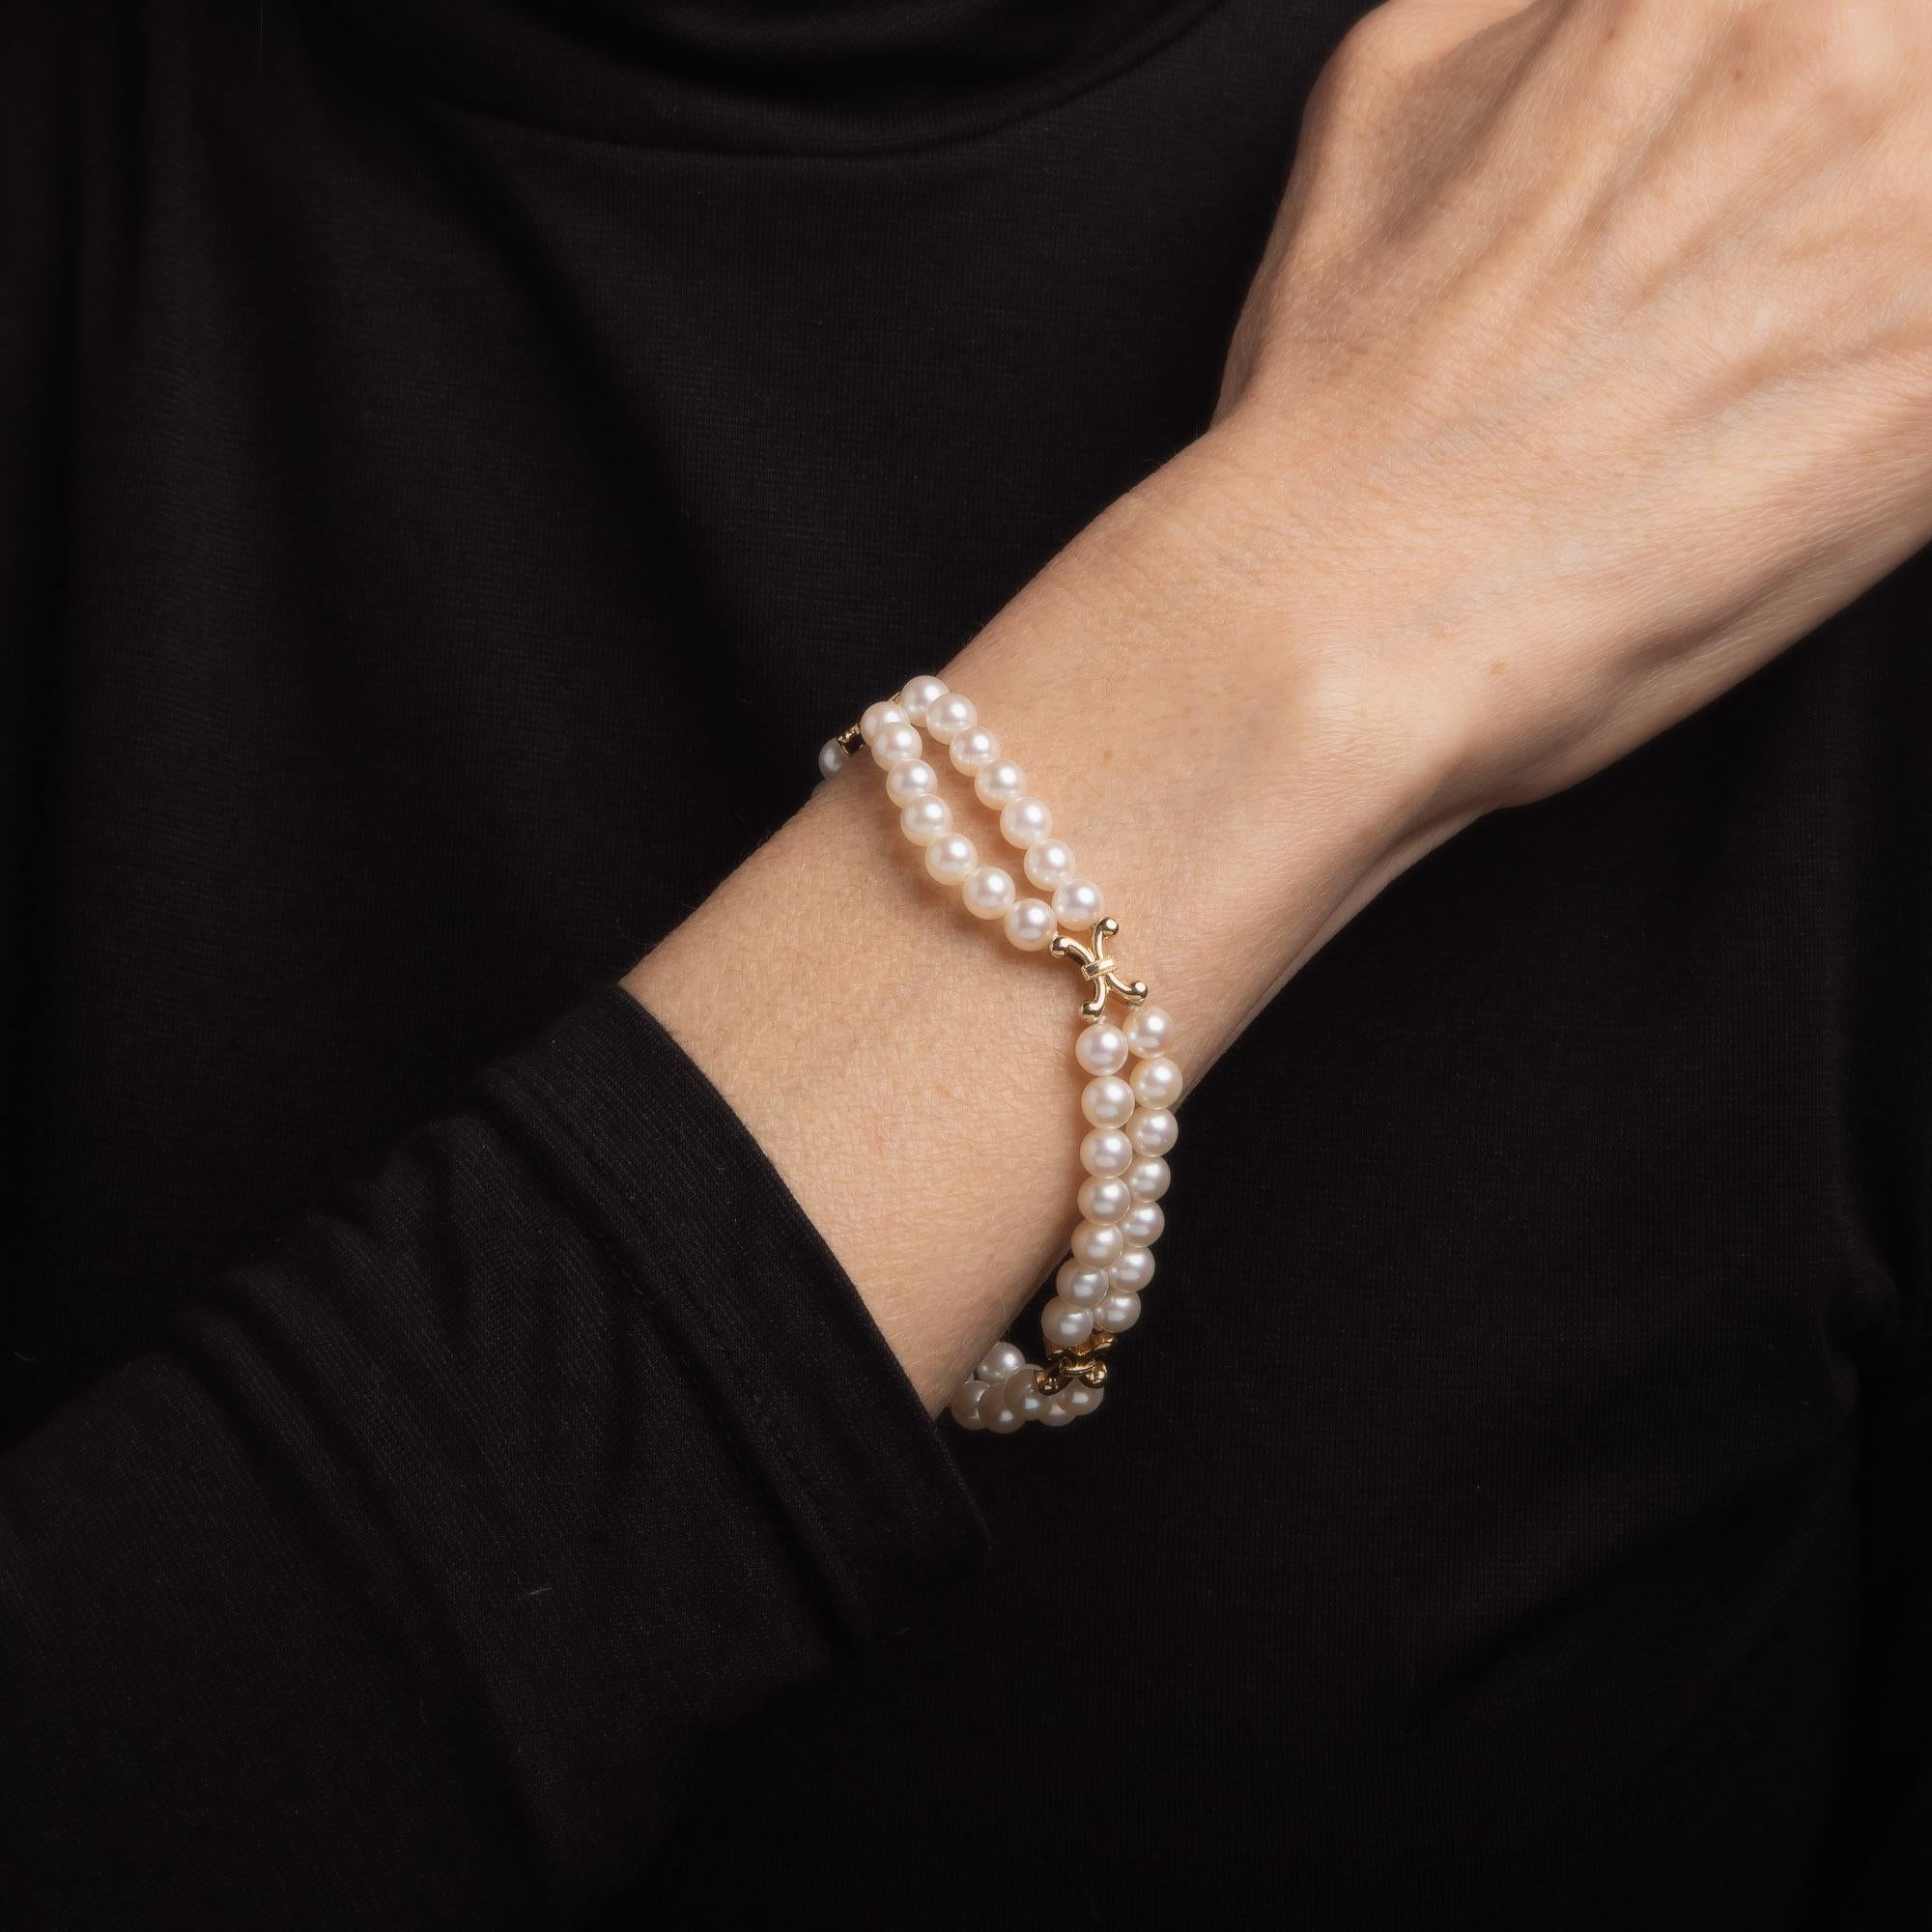 Elegant Mikimoto cultured Akoya pearl bracelet crafted in 14k yellow gold. 

5mm cultured Akoya pearls are strung on two strands. The pearls are lustrous and show rose overtones. 

The double strand bracelet highlights two rows of cultured Akoya